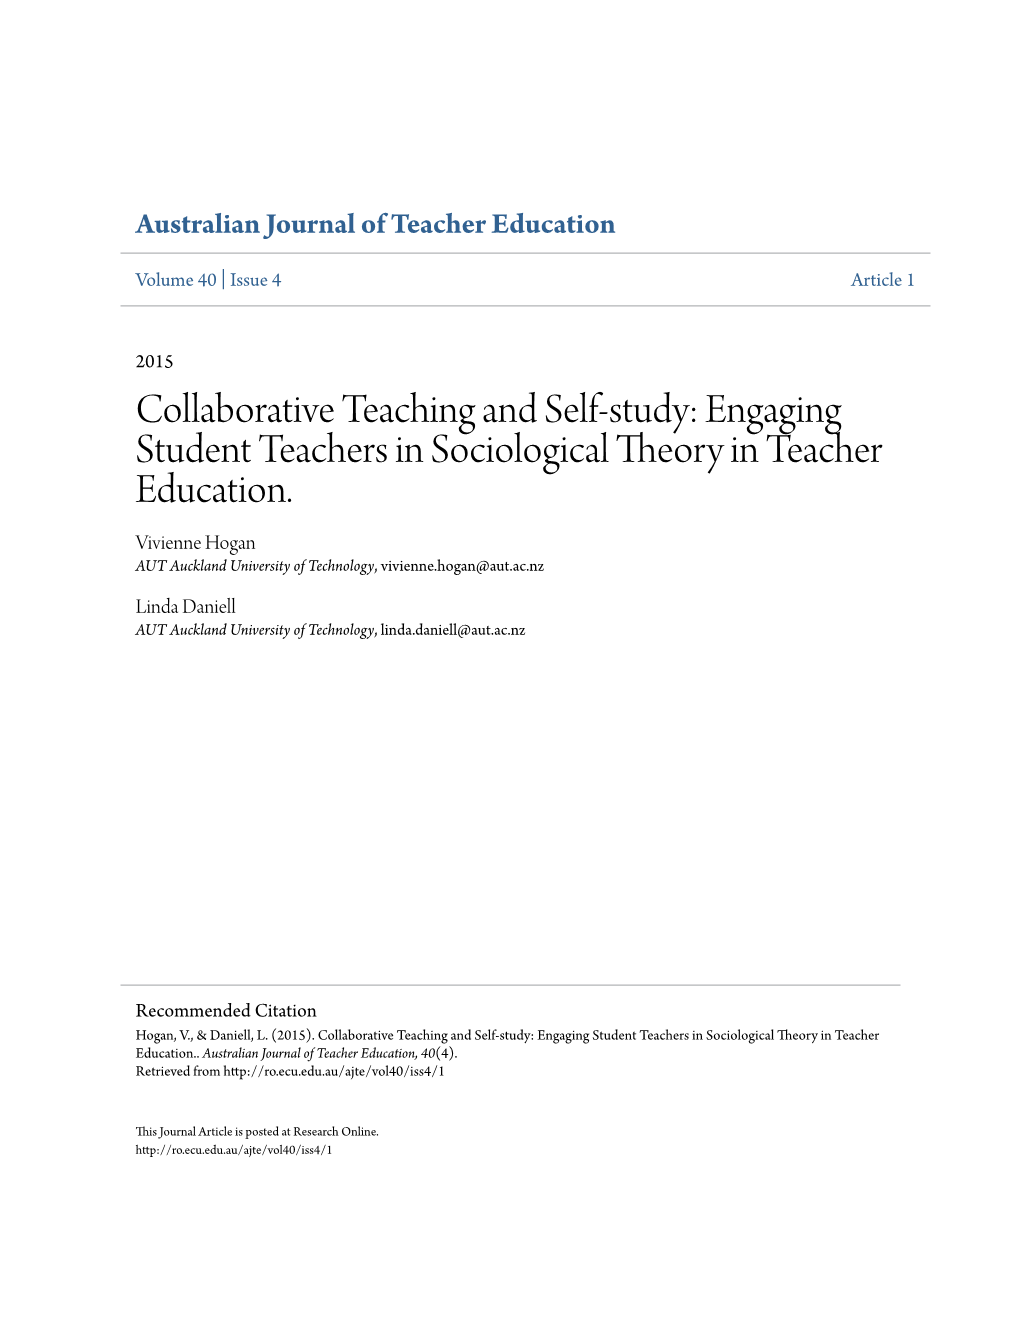 Collaborative Teaching and Self-Study: Engaging Student Teachers in Sociological Theory in Teacher Education